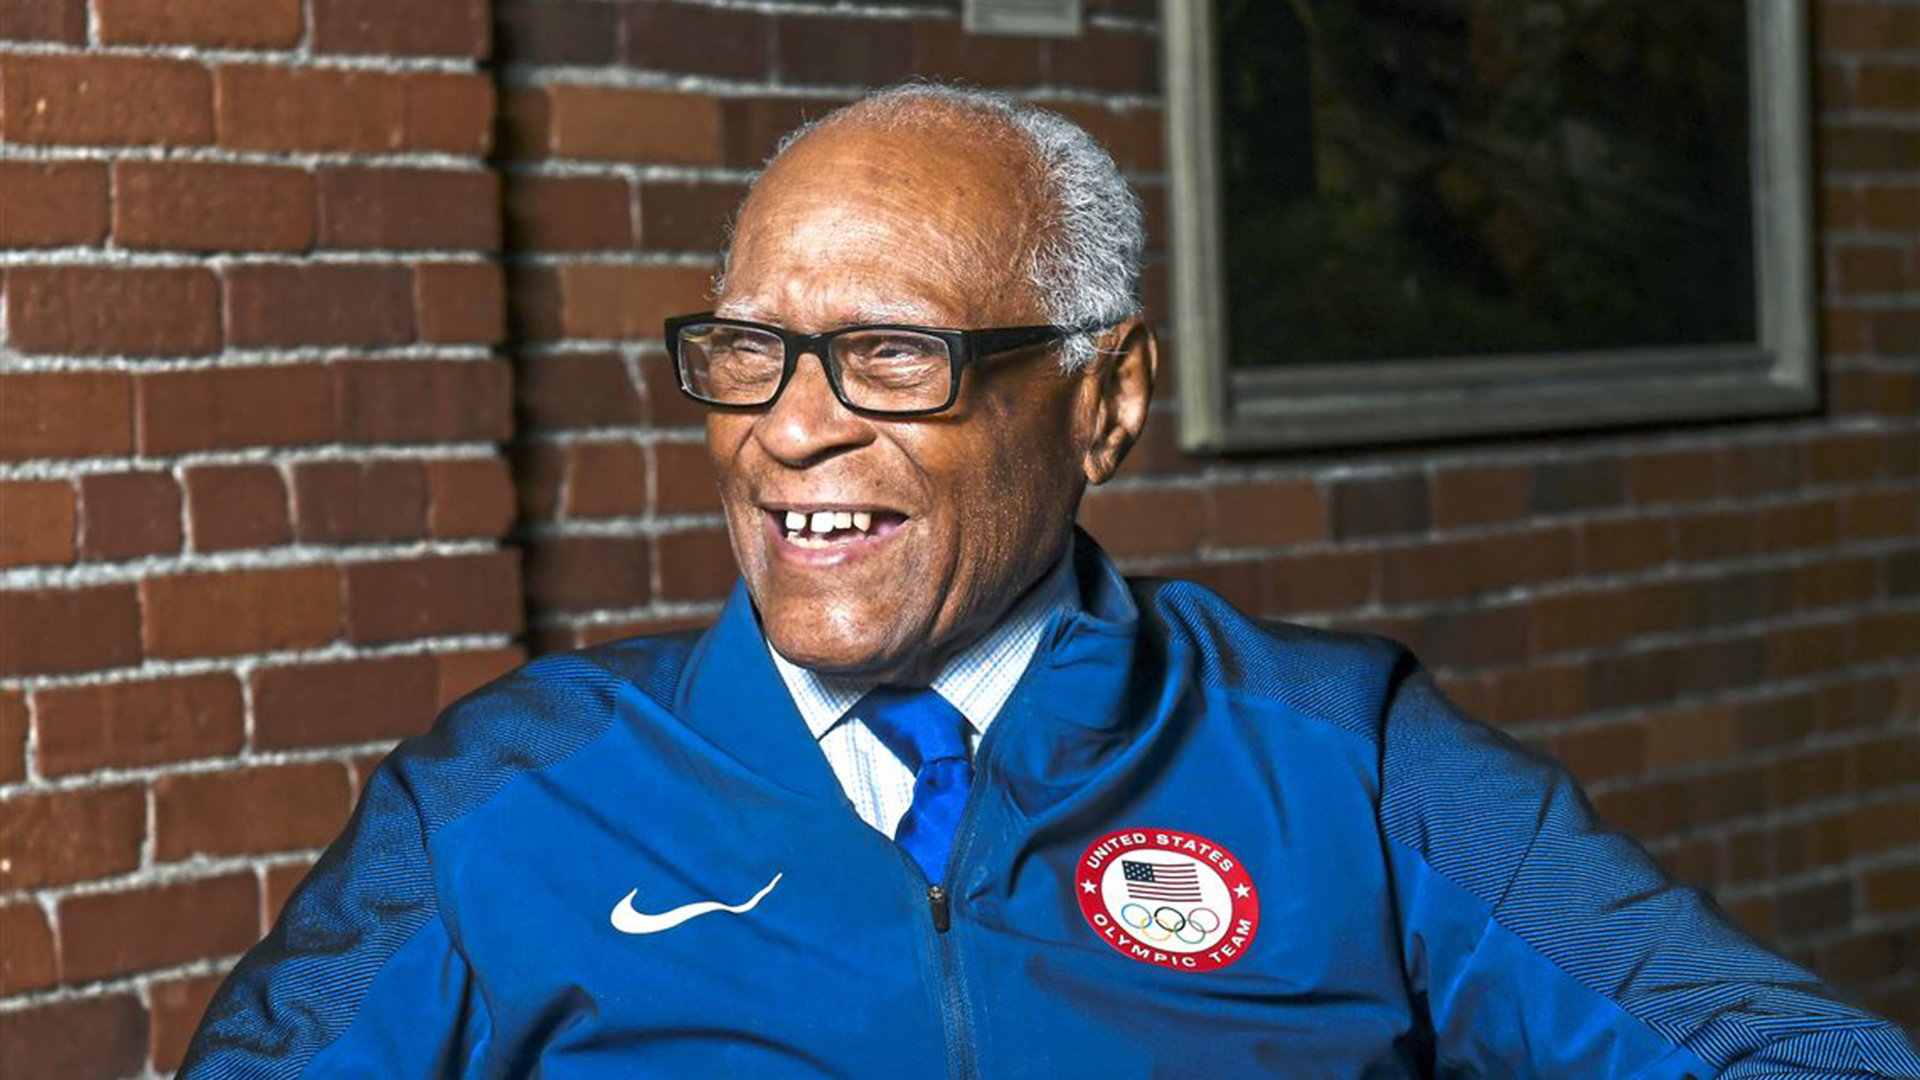 America’s oldest living Olympic medalist passes at 101